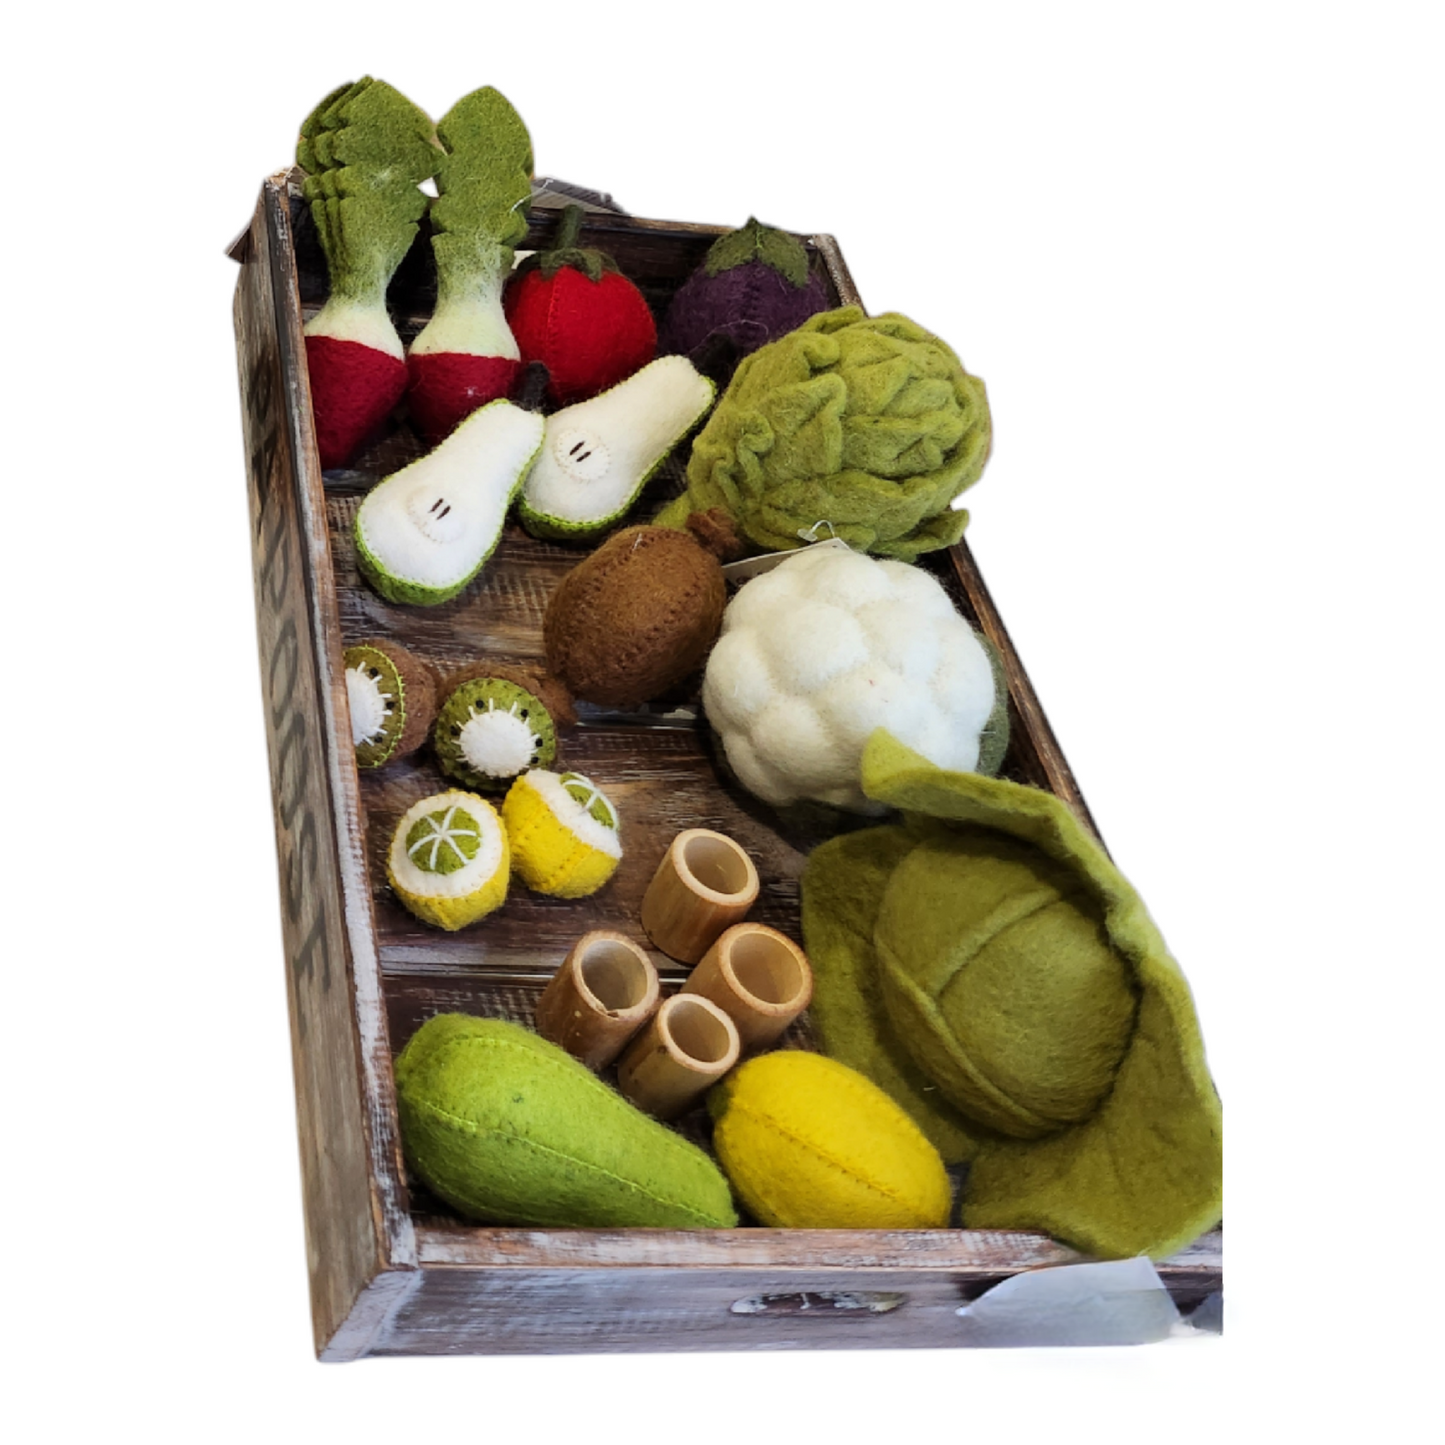 Papoose Felt Fruits and Vegetables (set of 9) in wooden crate